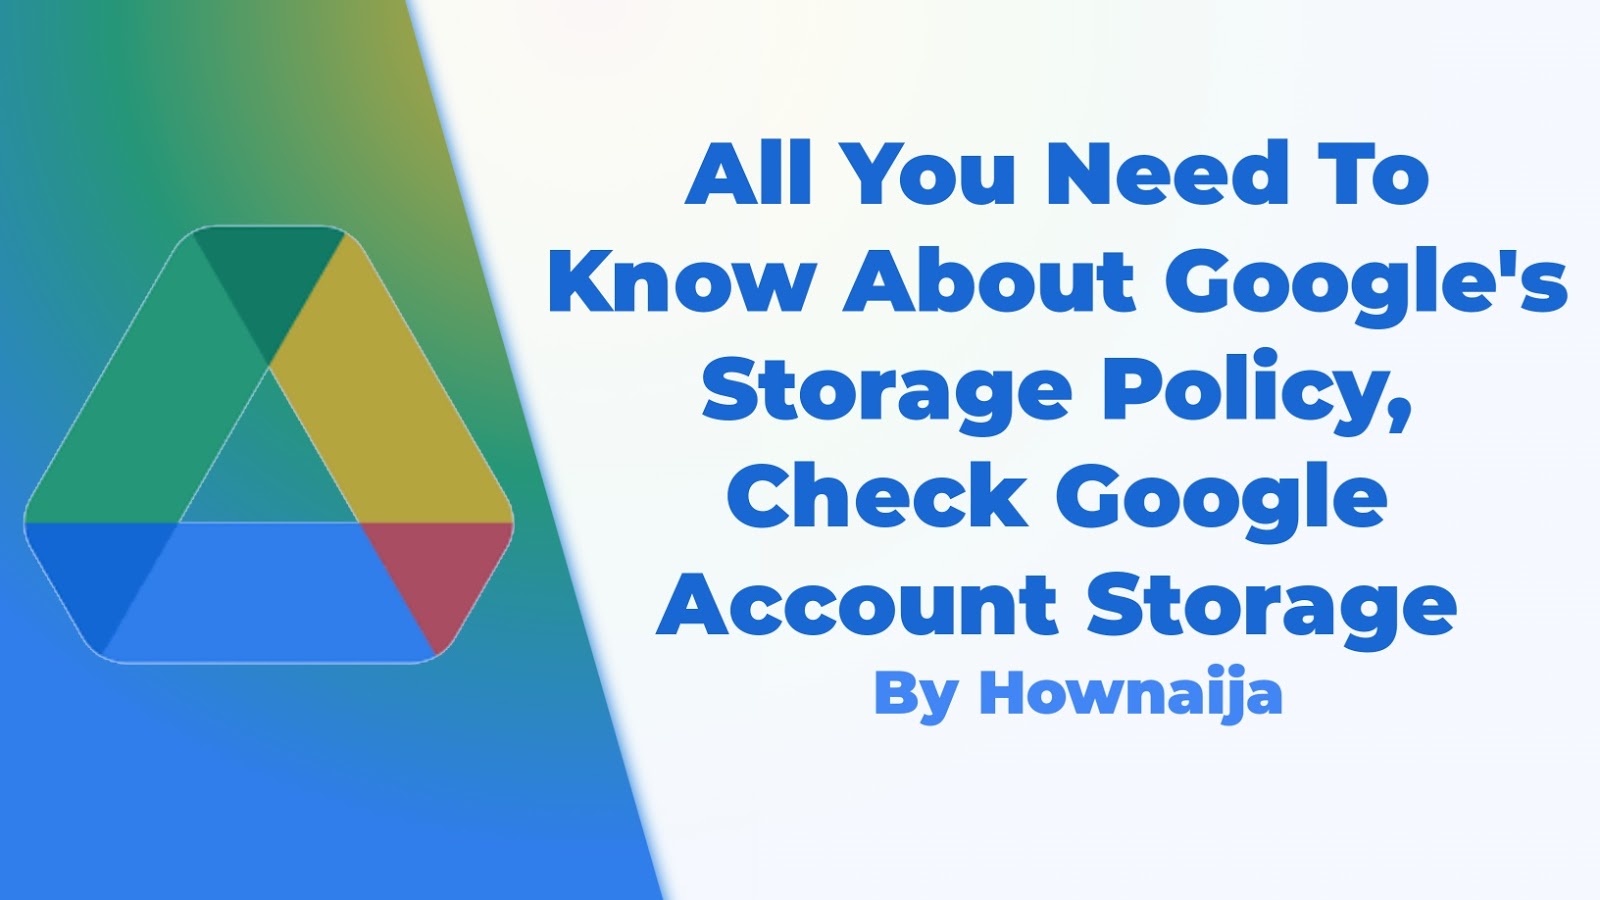 All You Need To Know About Google's Storage Policy, Check Google Account Storage